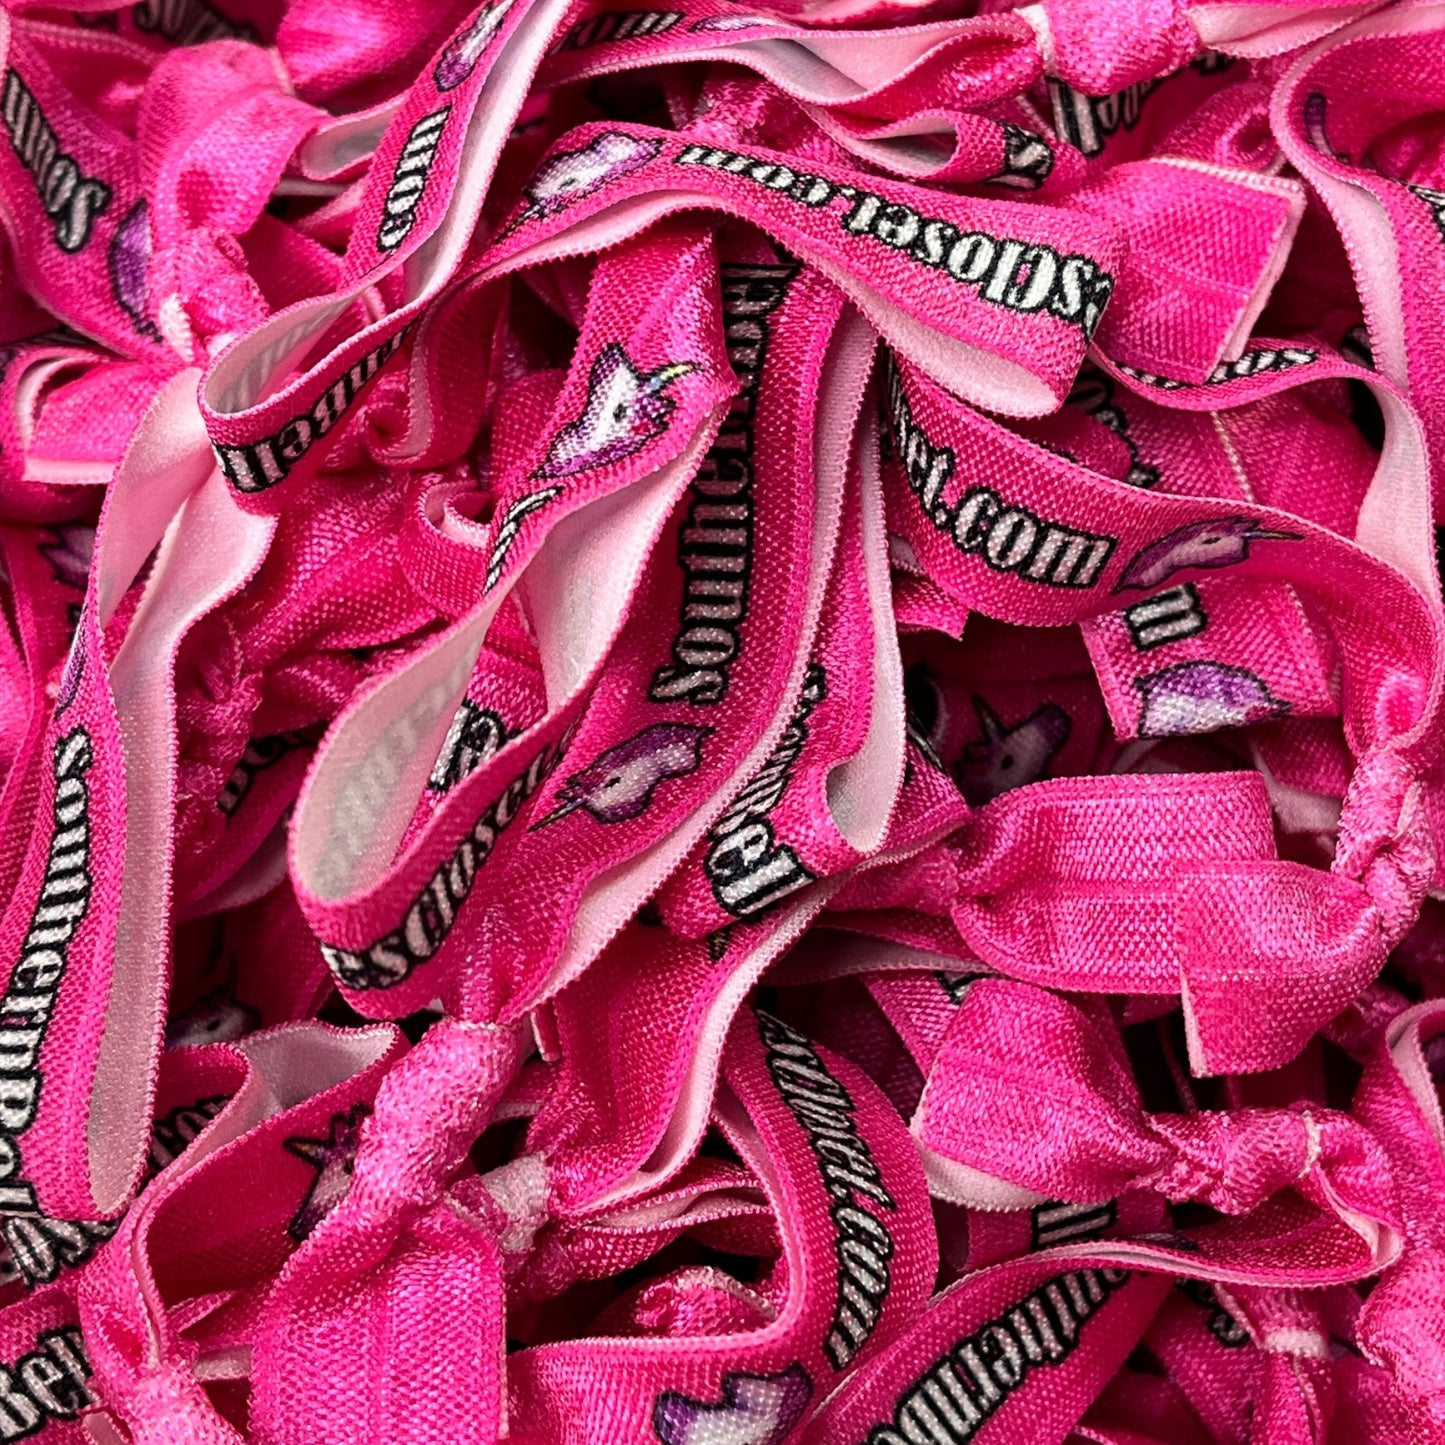 Custom Clothing Boutique Shop Promotional Hair Tie Bracelets - Add your logo and information - Bulk Discounts!